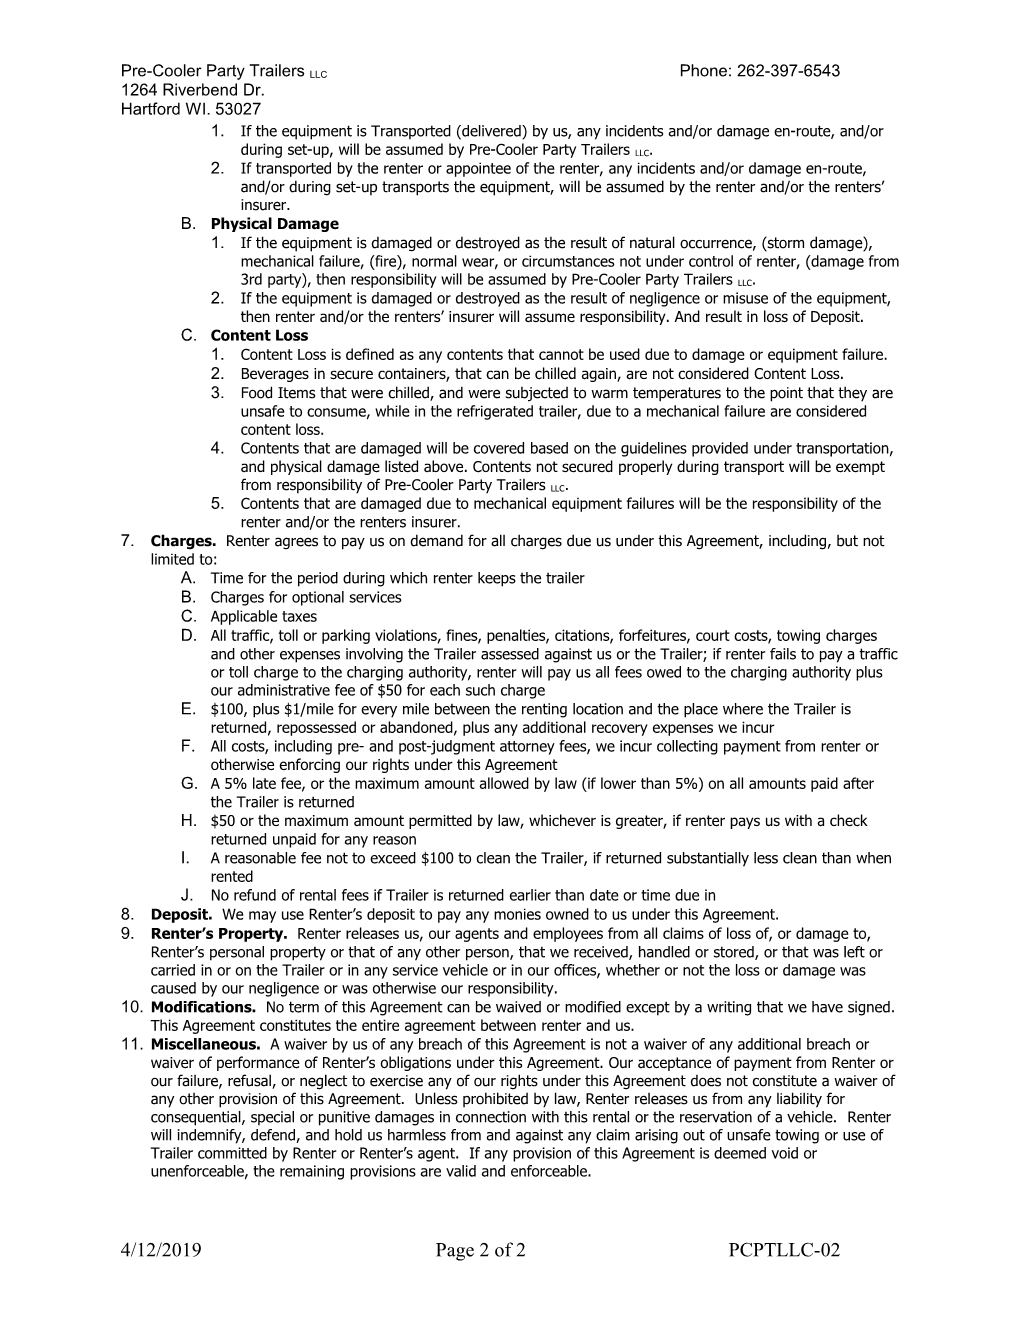 Rental Agreement and Conditions